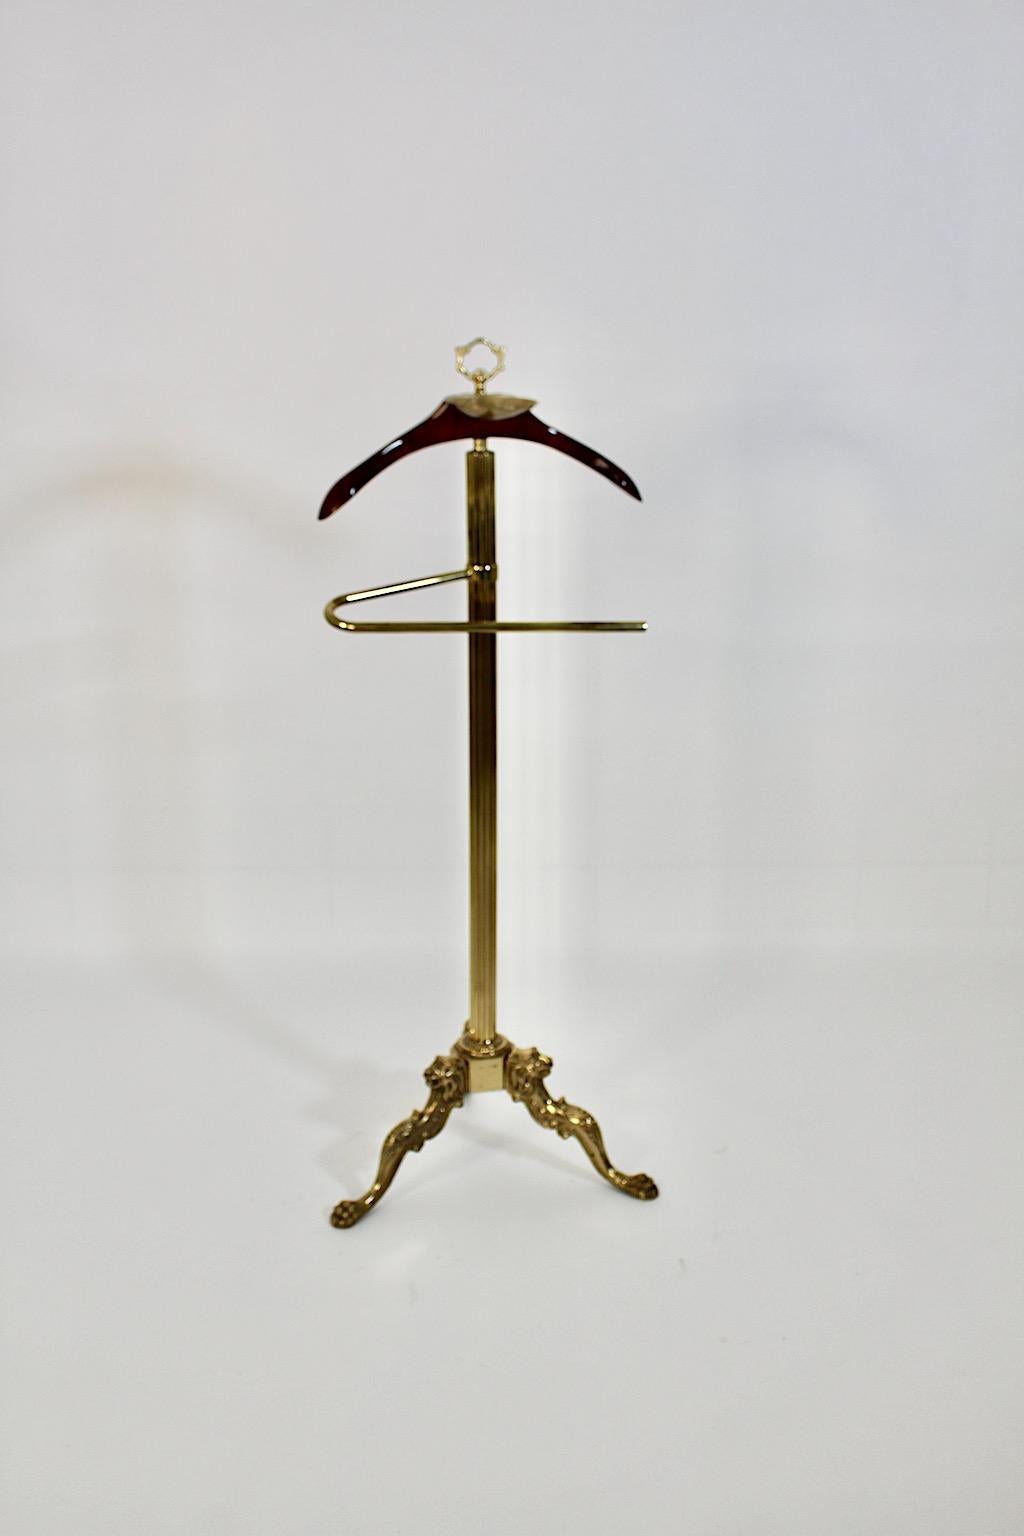 Hollywood Regency style vintage three legged valet or coat rack from brass and beech 1970s Italy.
An amazing valet or coat rack from brass and beech with beautiful details.
This three legged valet shows a body from brass while the hanger was made